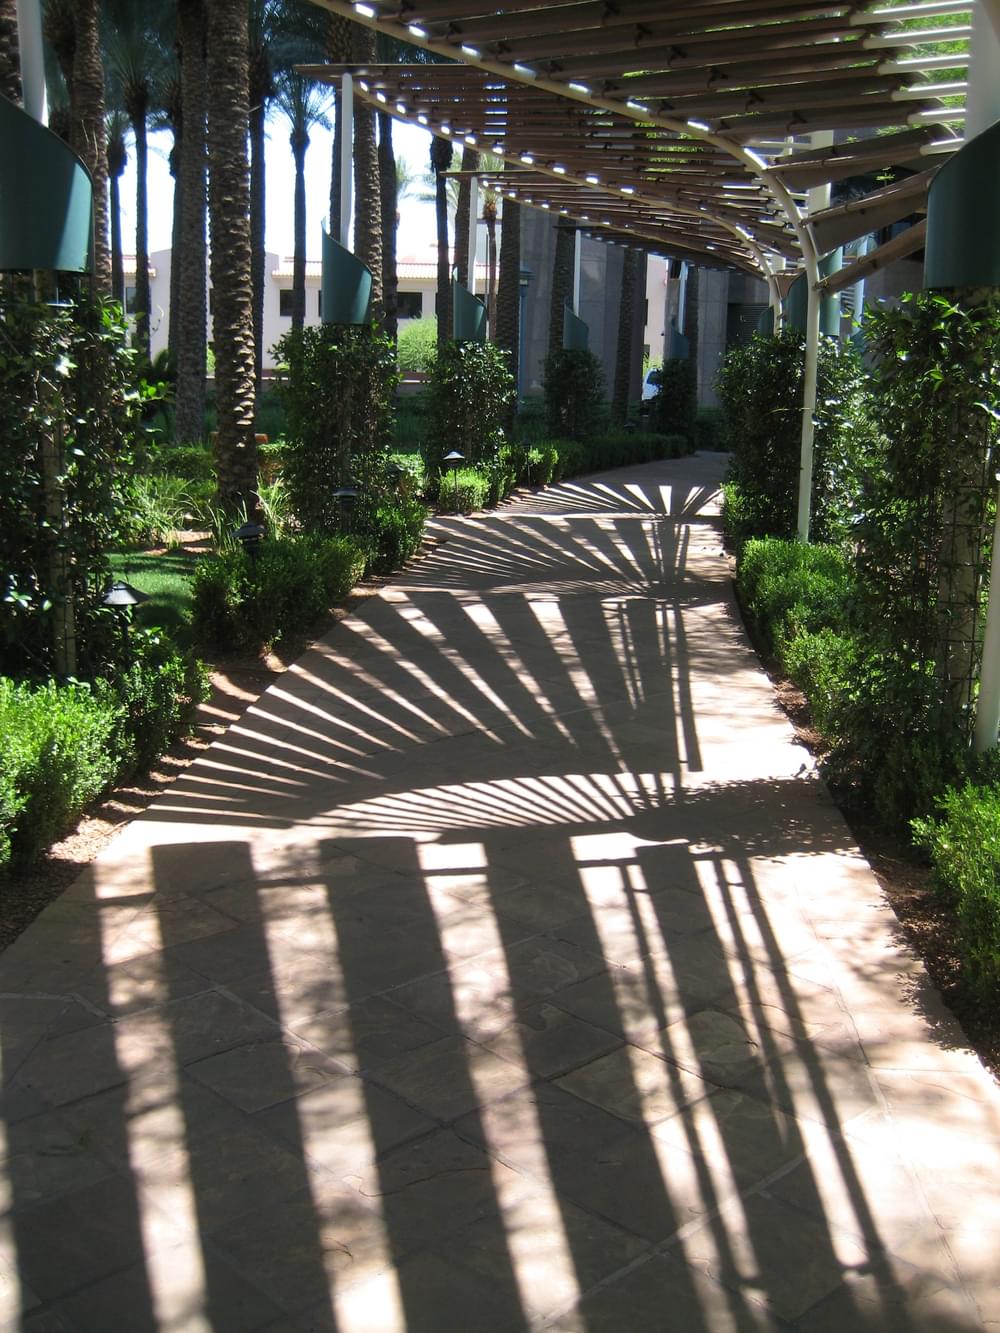 Artistic shade structures add interesting shadows to park trail in downtown Phoenix, Arizona